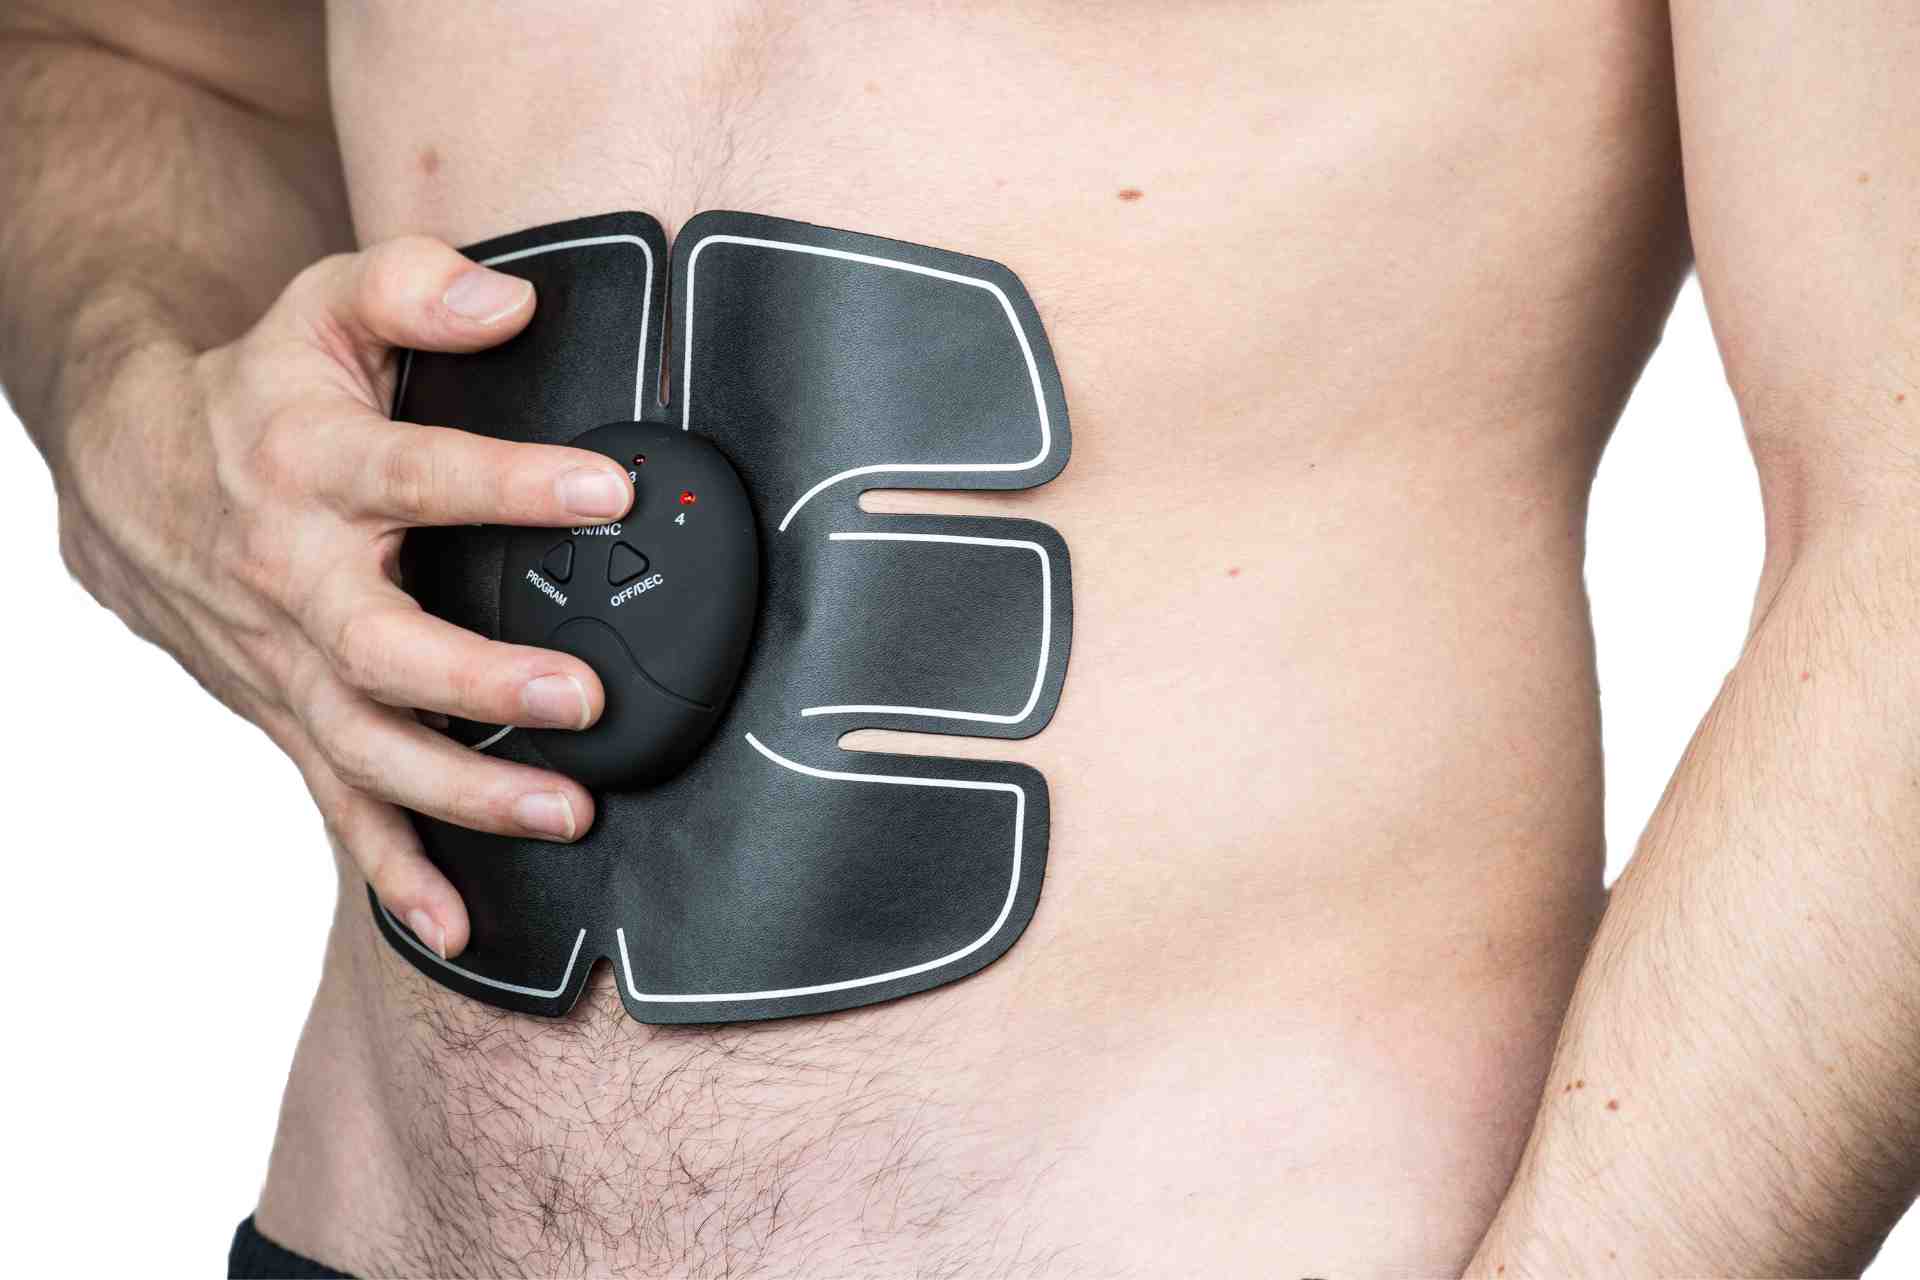 Check out the ABS Stimulator